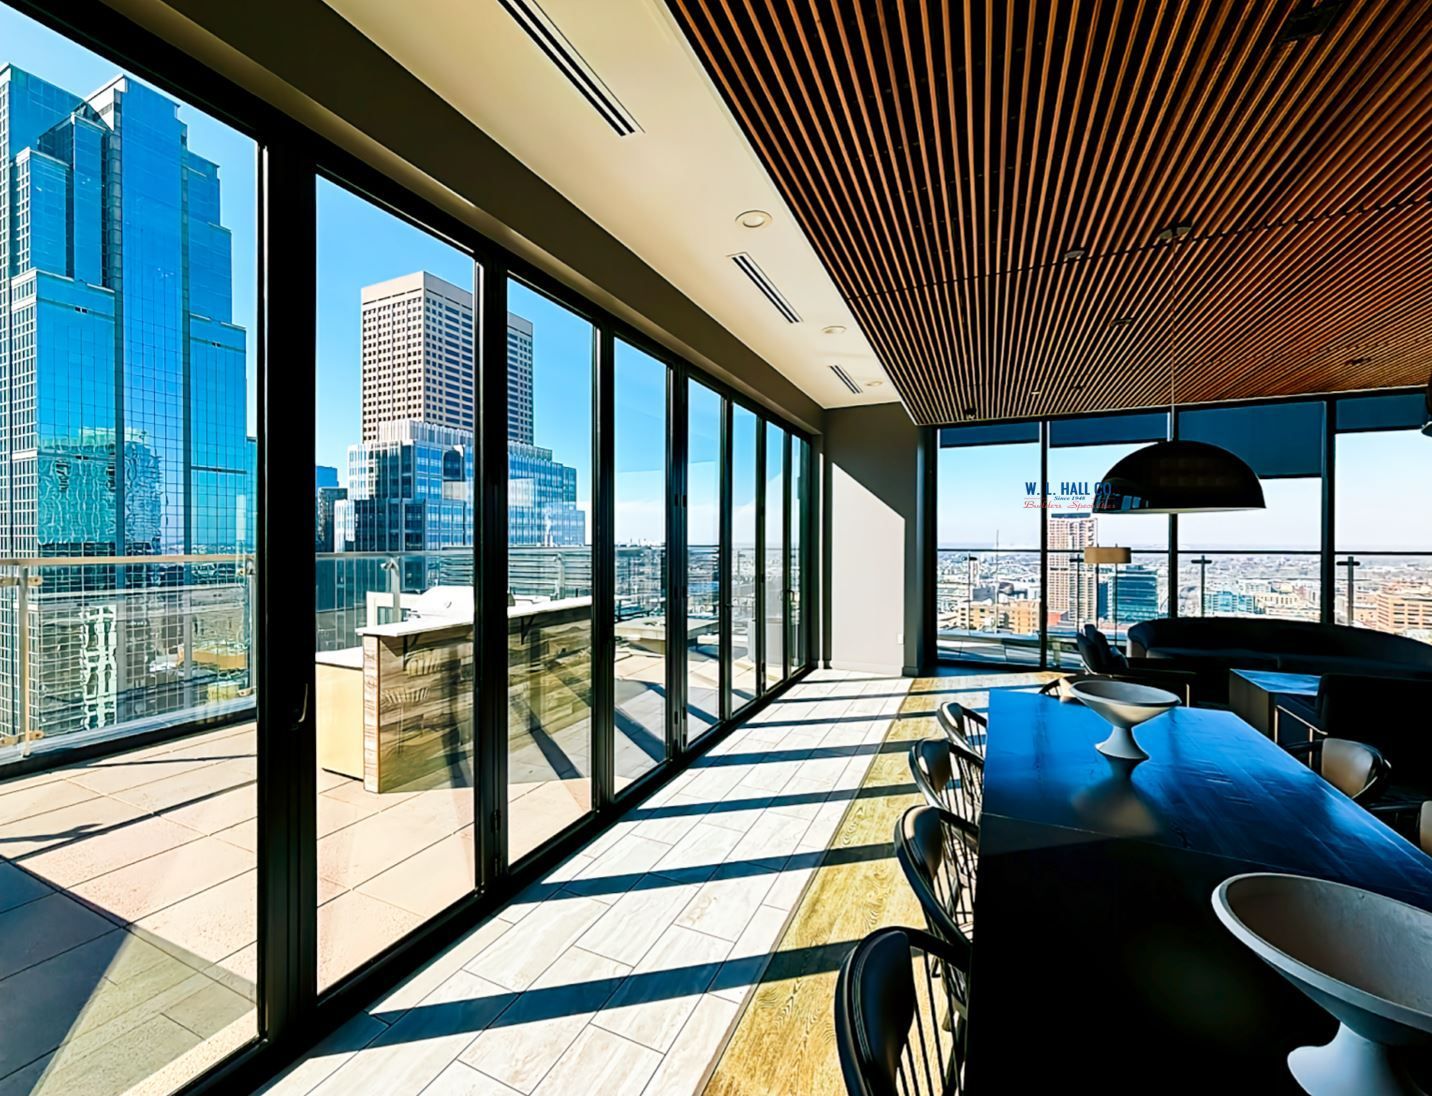 w l hall company 4Marq Apartments (Minneapolis) -
High-Performance and Cost-Effective Window Systems that Produce Amazing Views 5